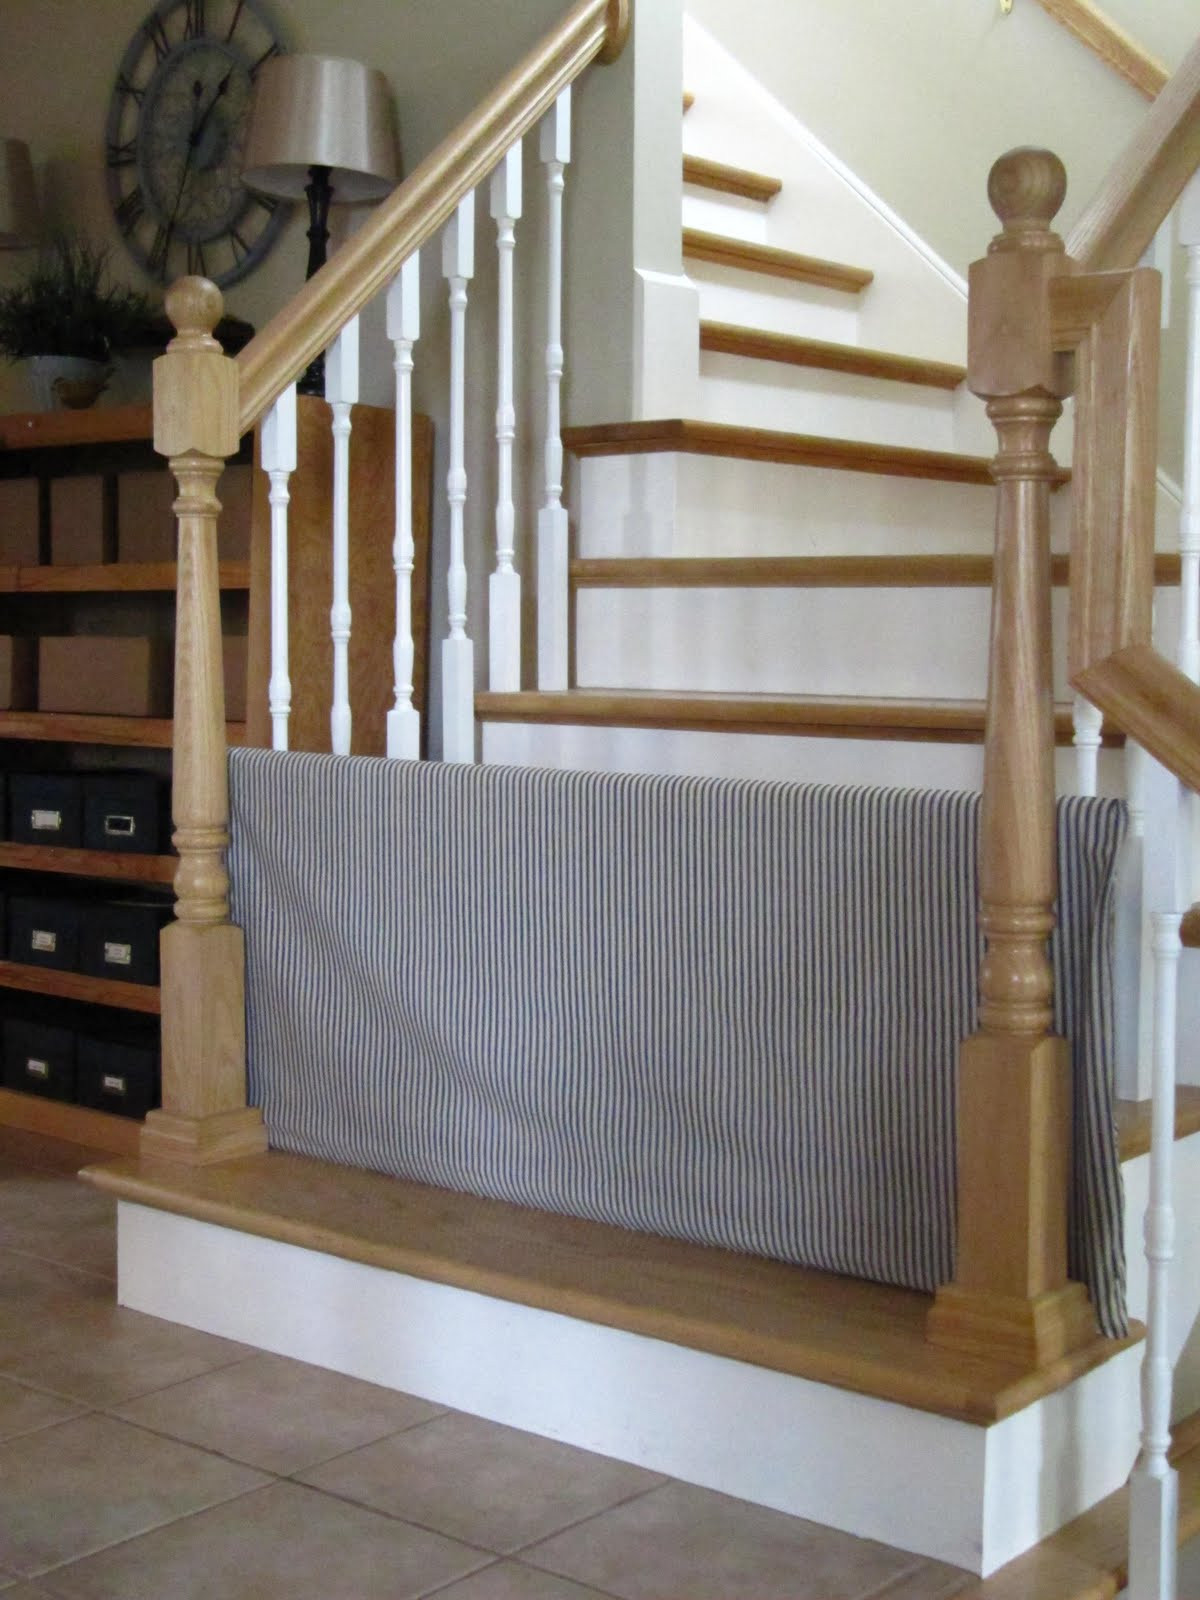 DIY Baby Gate For Stairs
 20 DIY Baby Gate Ideas Fabric Pallet and Wood Frame